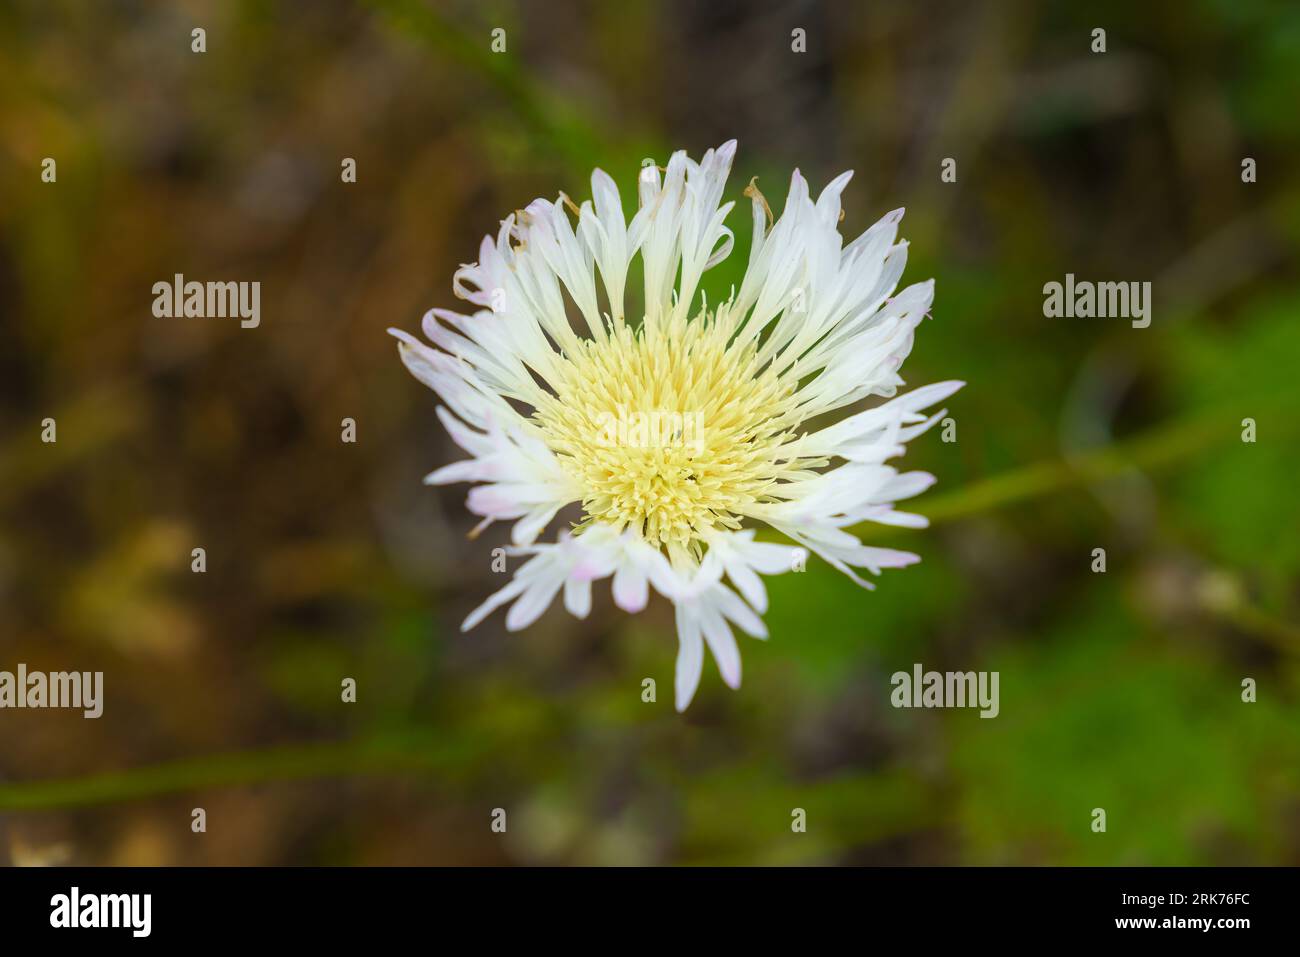 A macro close-up of a Centaurea chilensis against a blurred background Stock Photo